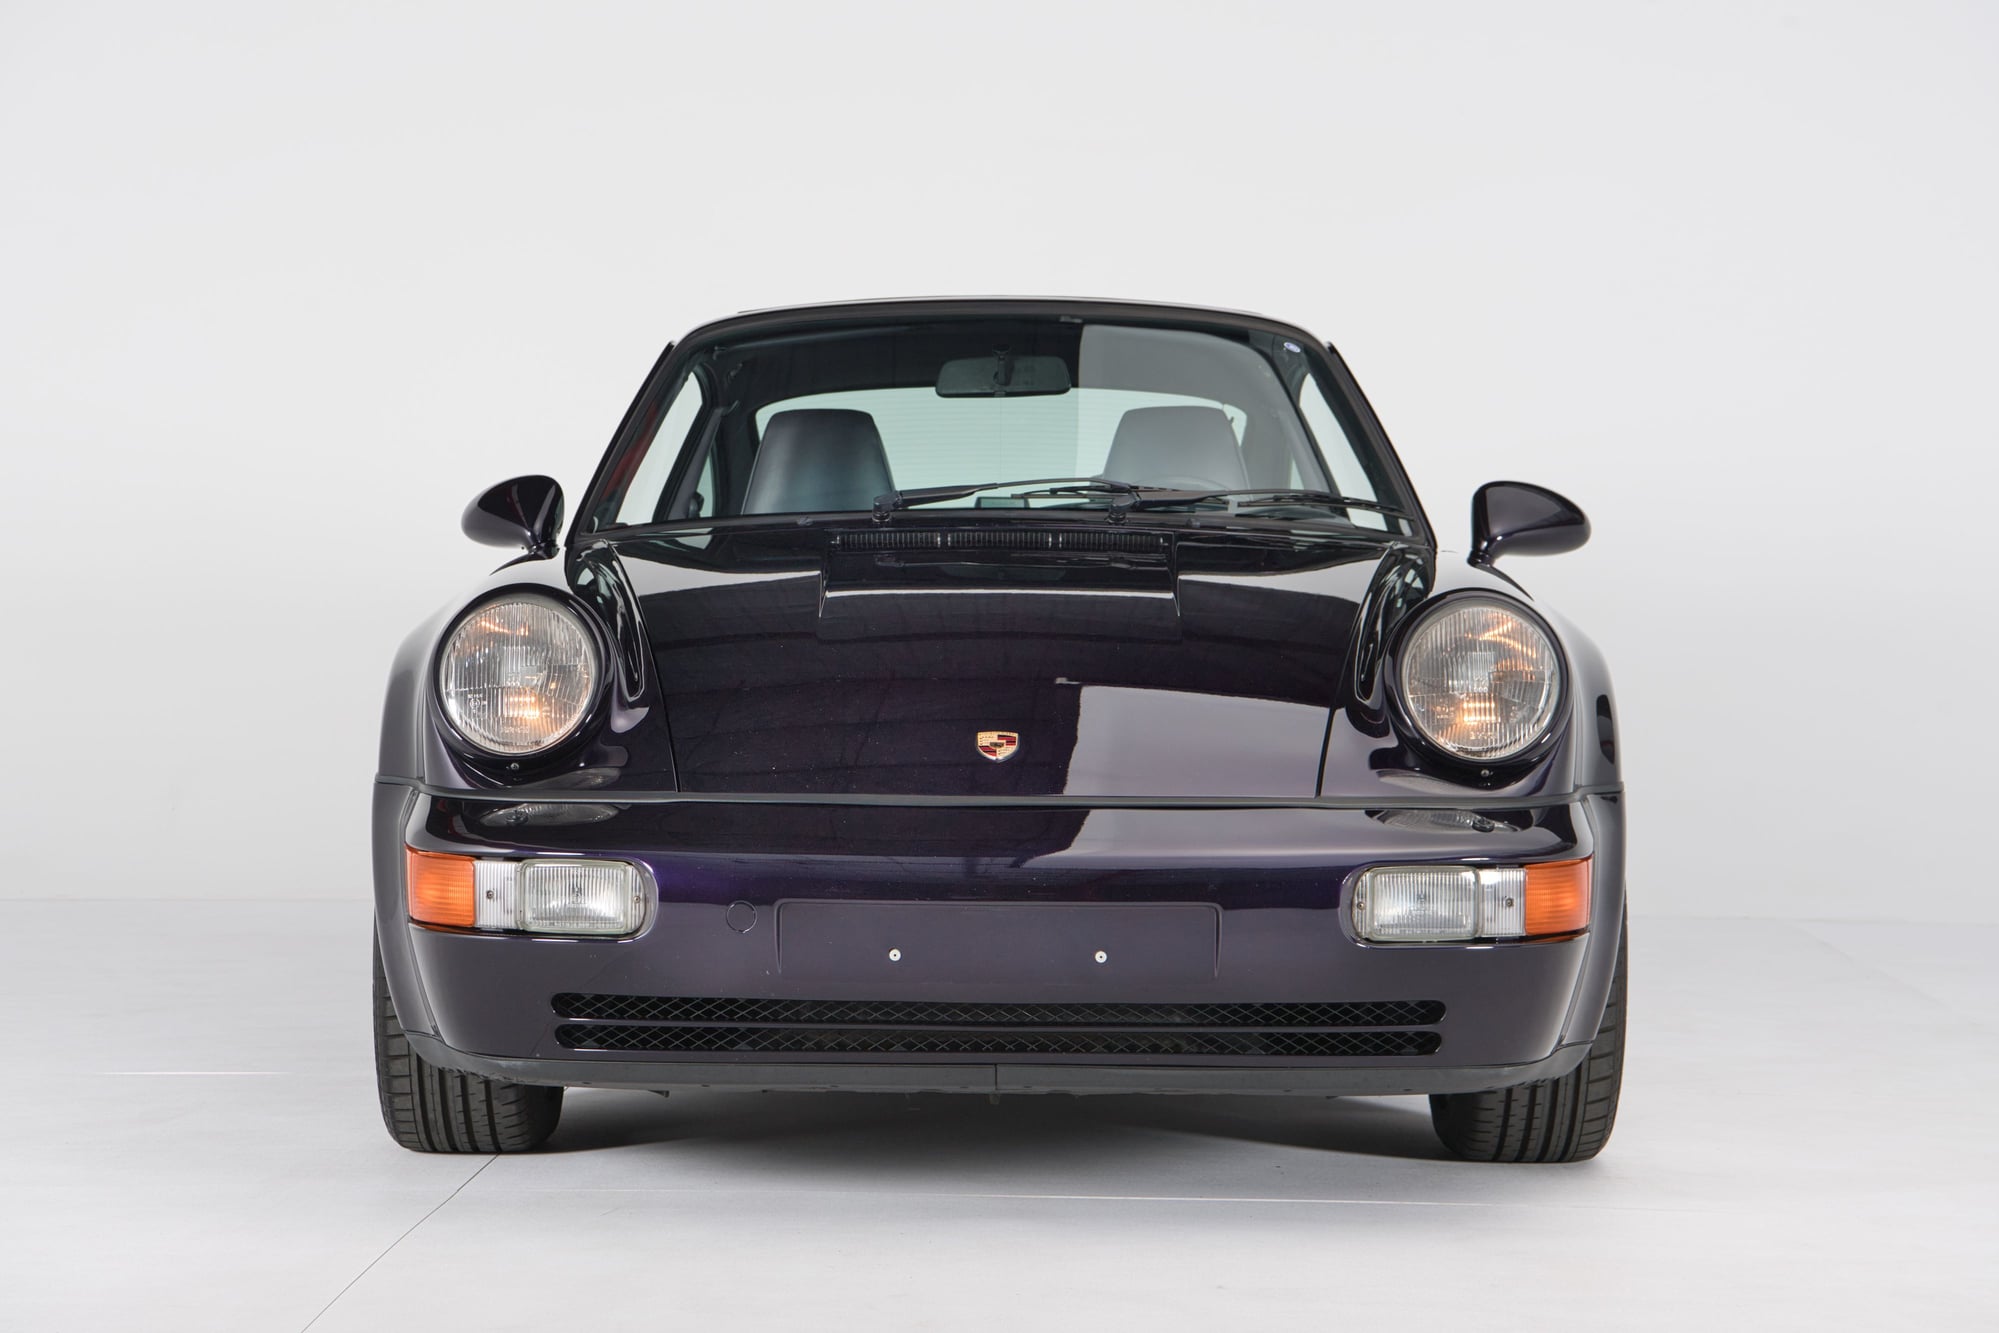 1993 Porsche 911 - 1993 Porsche 911 (964) Carrera 4 Widebody 30 Jahre Jubilee limited edition (RoW only) - Used - VIN WP0ZZZ96ZPS402198 - 56,500 Miles - 6 cyl - AWD - Manual - Coupe - Other - Houston, TX 77008, United States